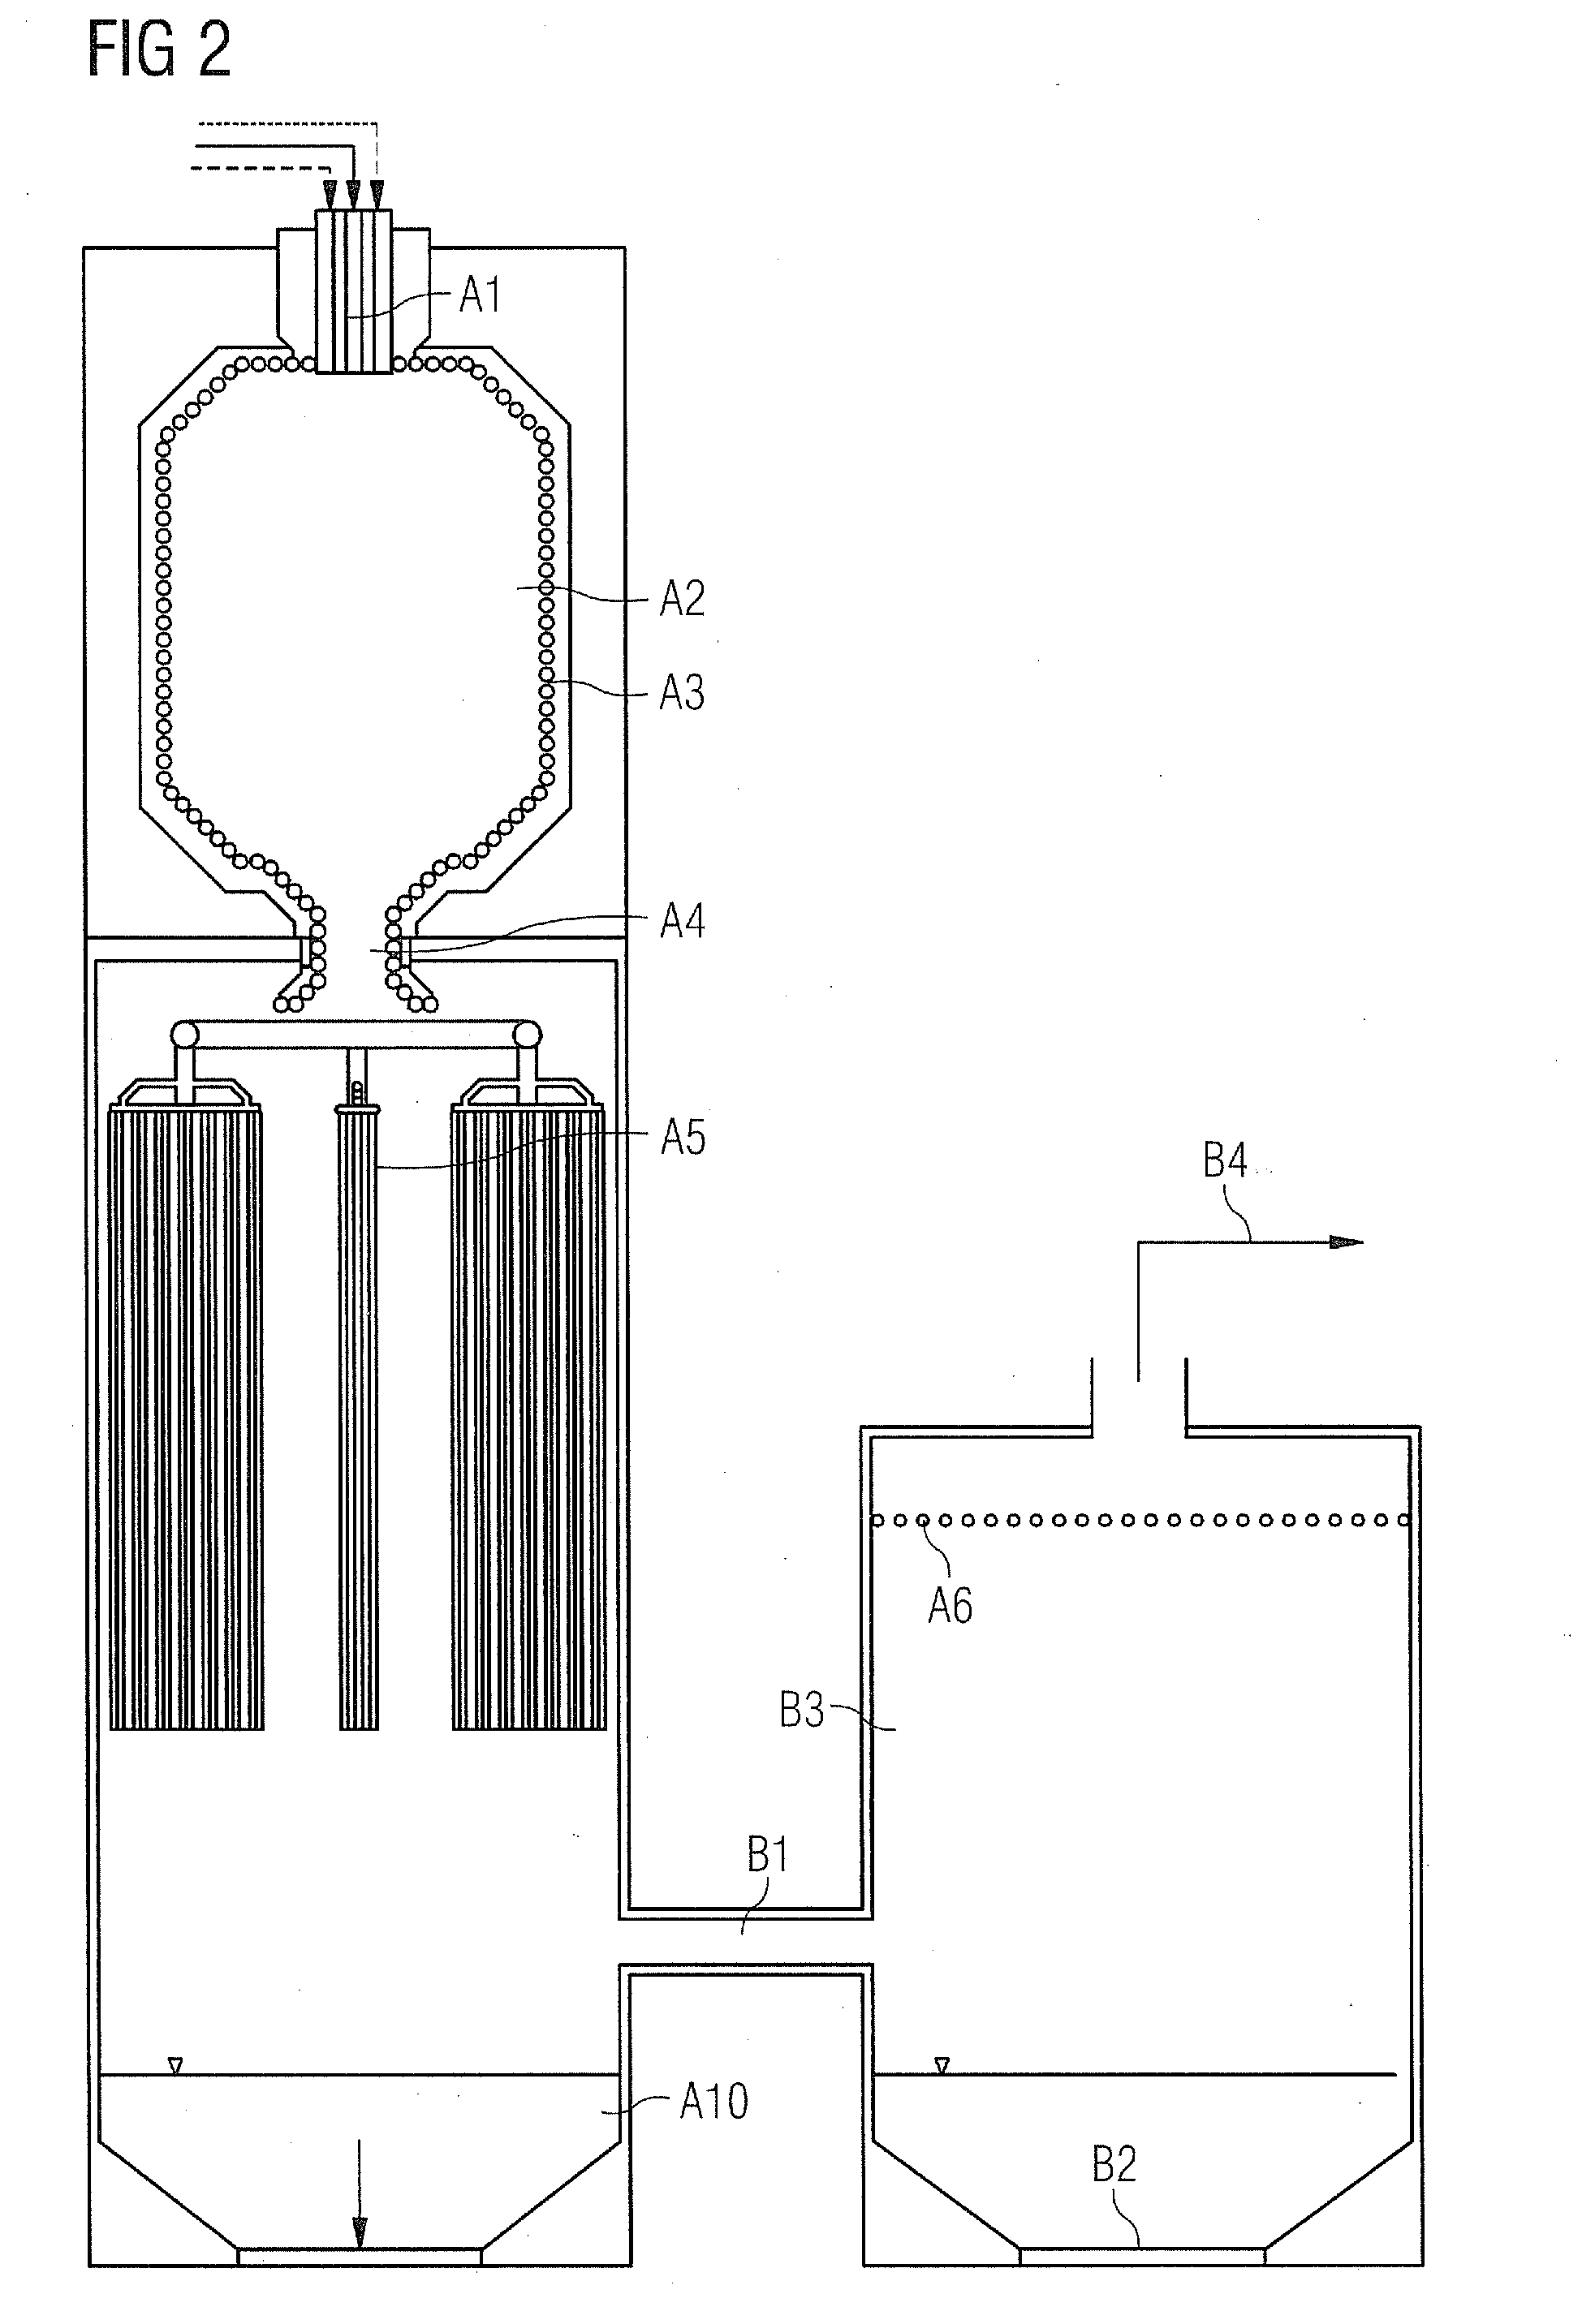 Entrained flow gasifier with integrated radiation cooler